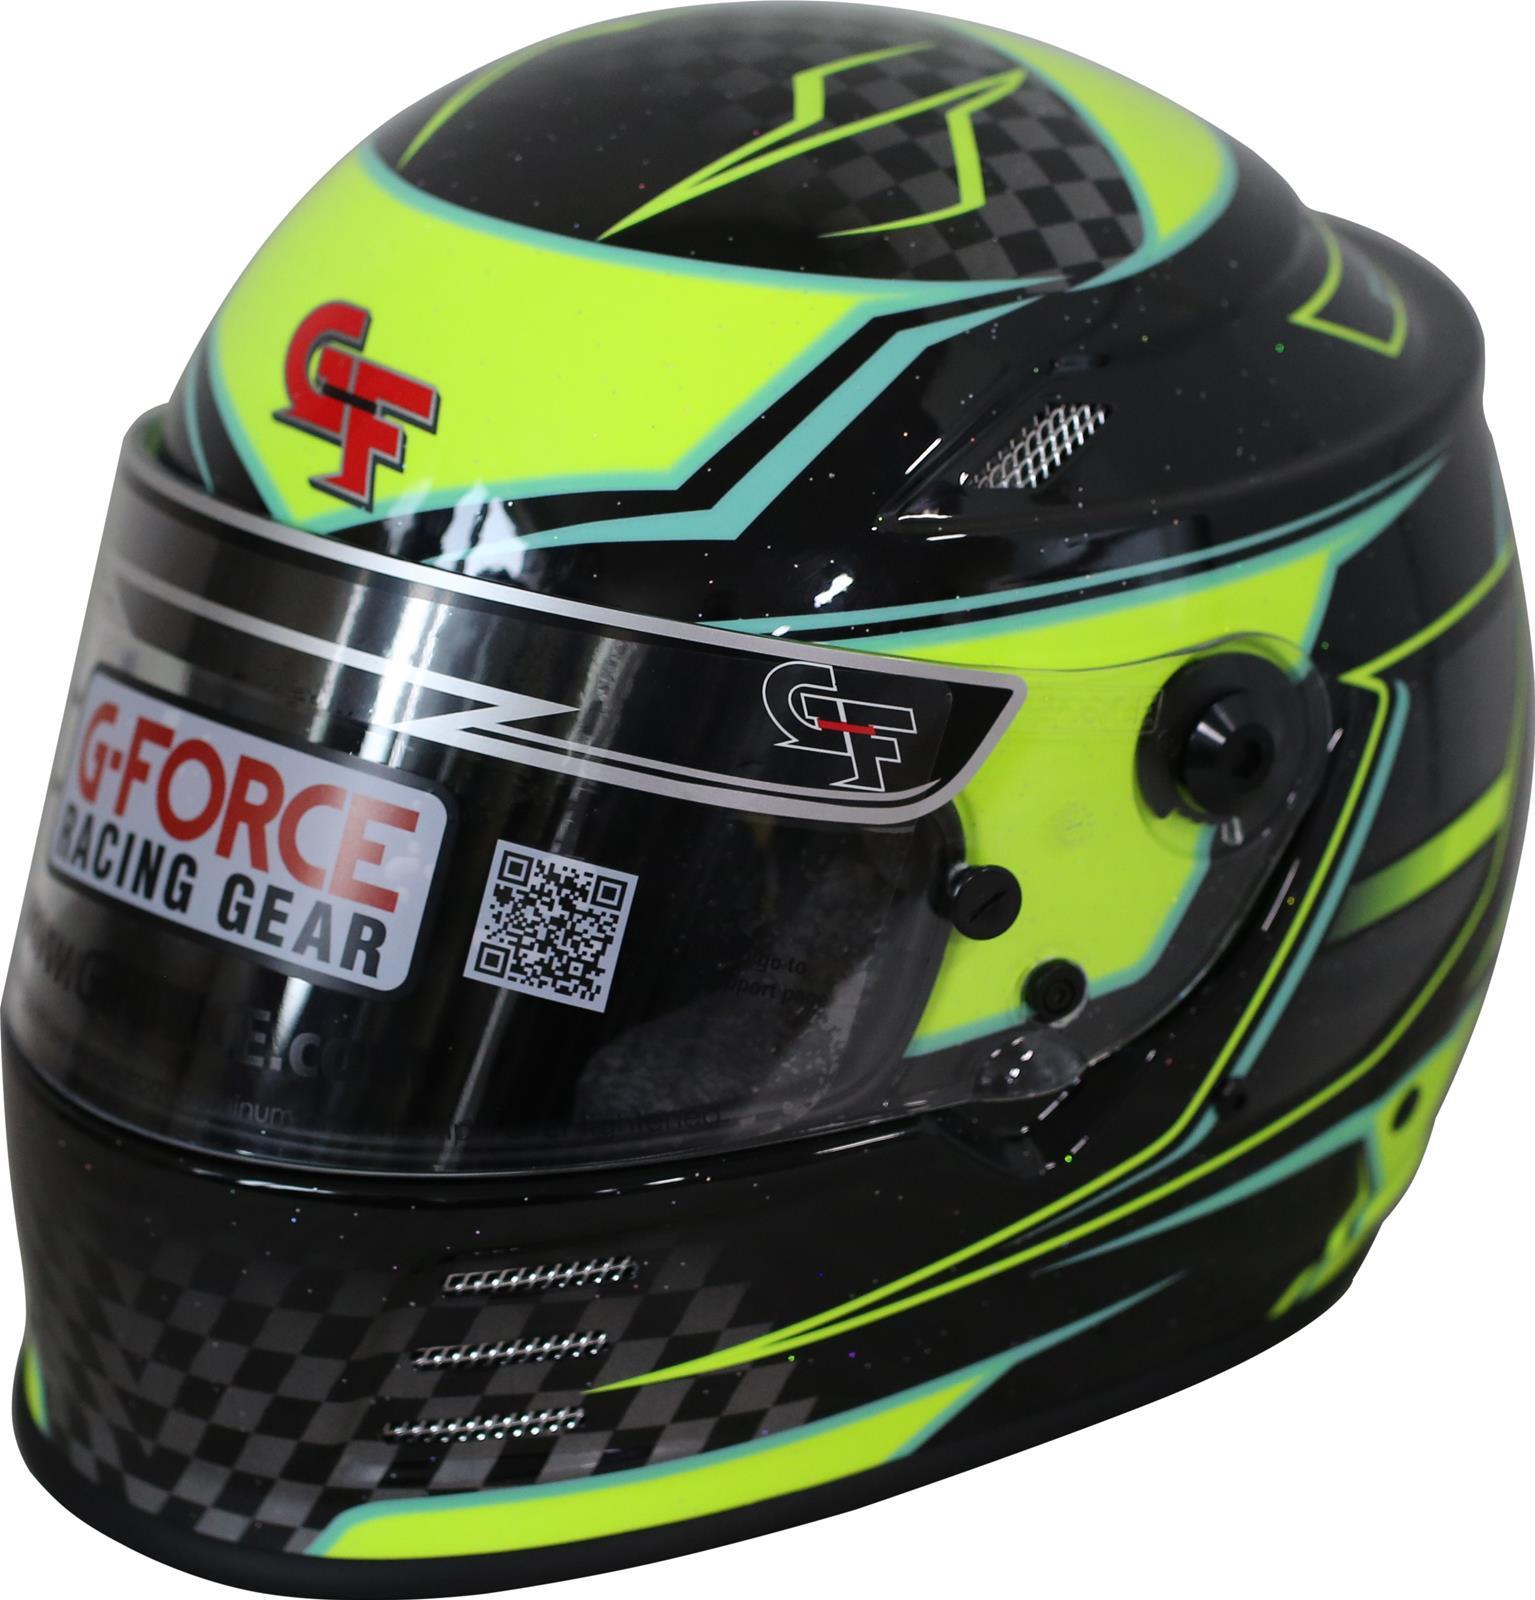 G-Force Racing Gear 13005XLGYL Helmet, Revo Graphics, Full Face, Snell SA2020, Head and Neck Support Ready, Black / Yellow, X-Large, Each